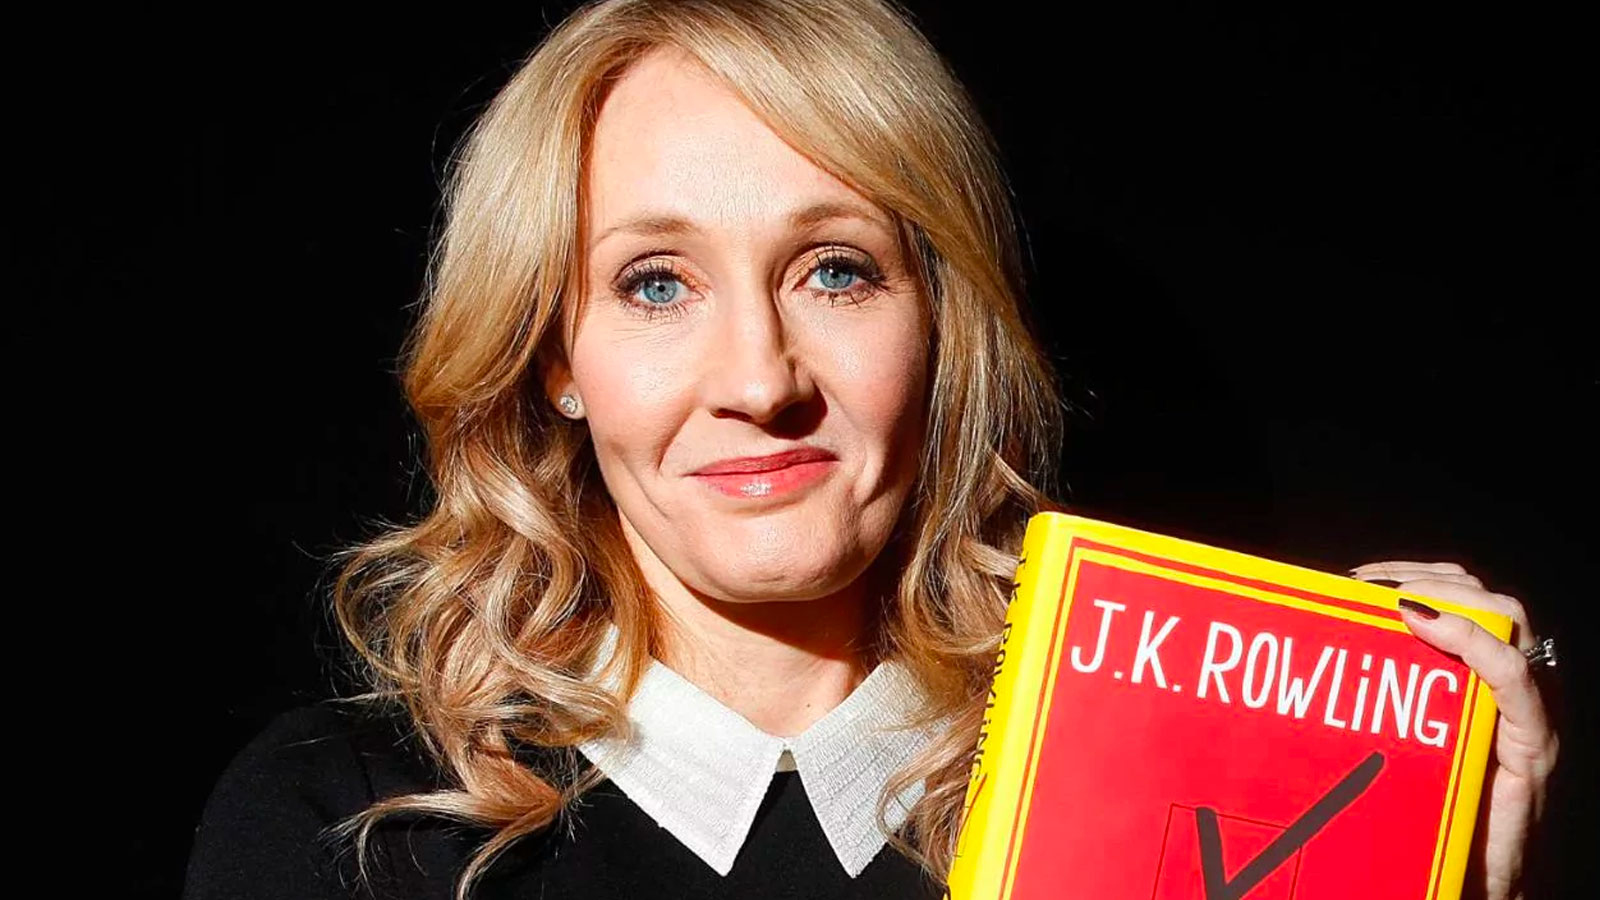 The Hardest General Knowledge True/False Quiz You’ll Take This Year J. K. Rowling